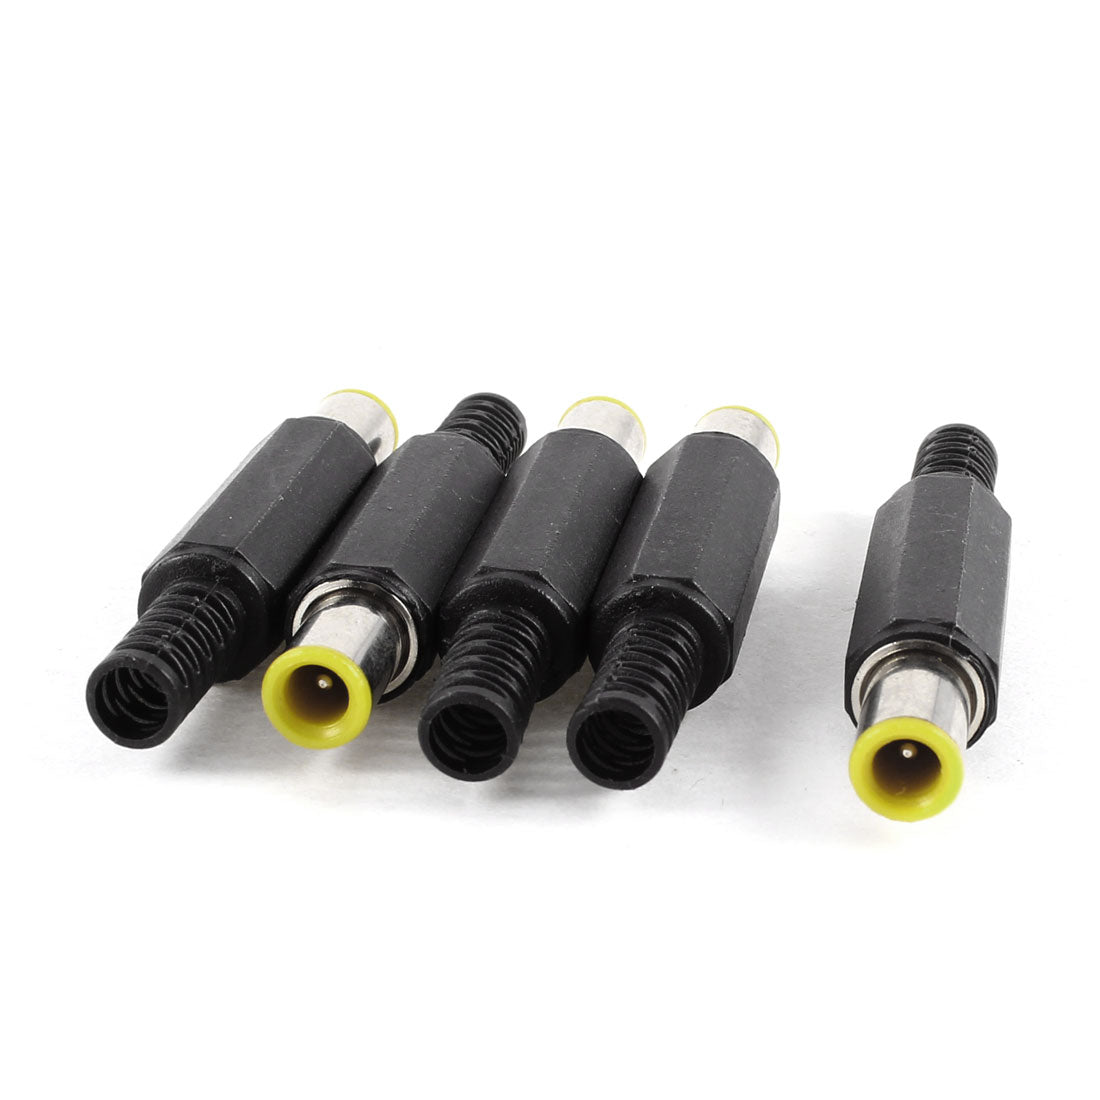 uxcell Uxcell PC Connection DC Connector Jack Male Connector 7mmx1mmx9mm 5 Pcs